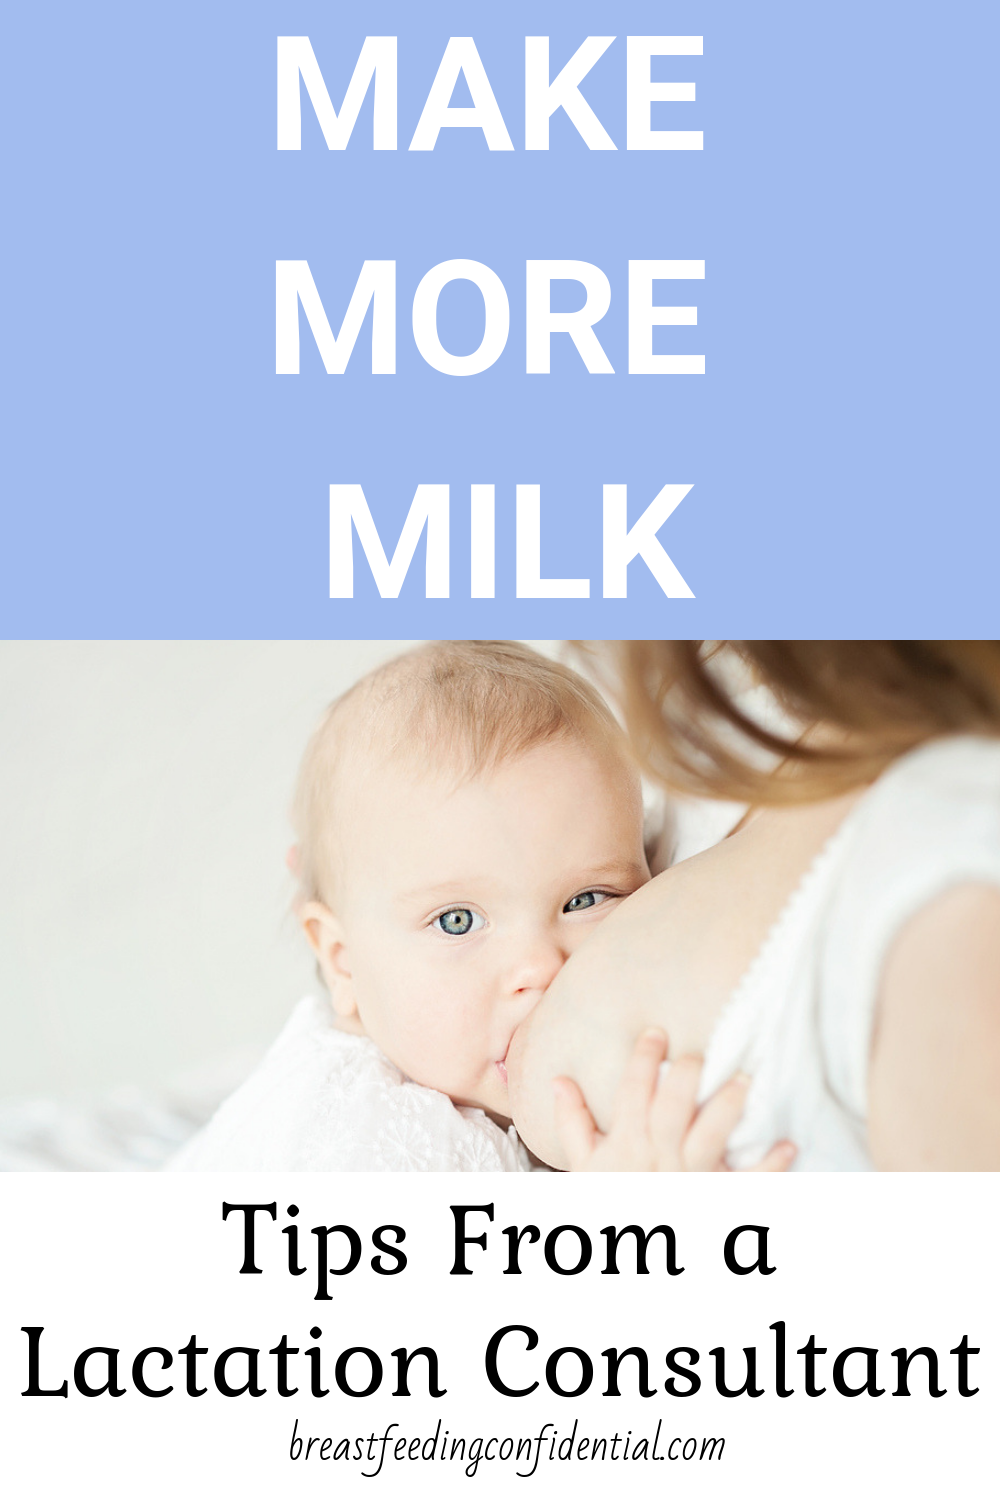 There are so many things said about how to make more milk ...